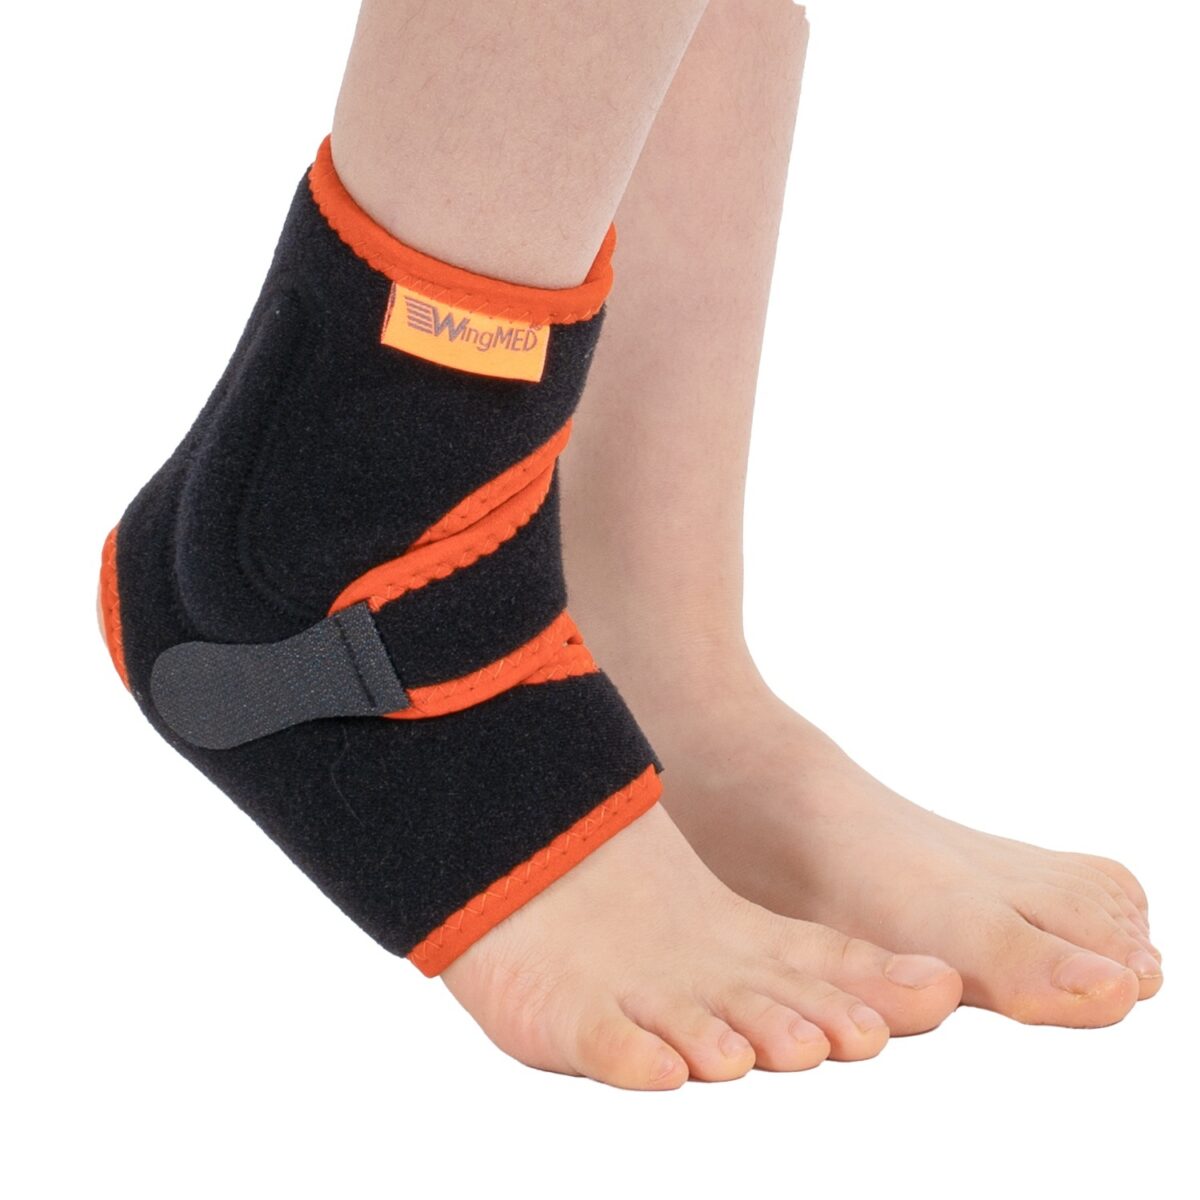 wingmed orthopedic equipments W922 ligament ankle support with 8 starp 28